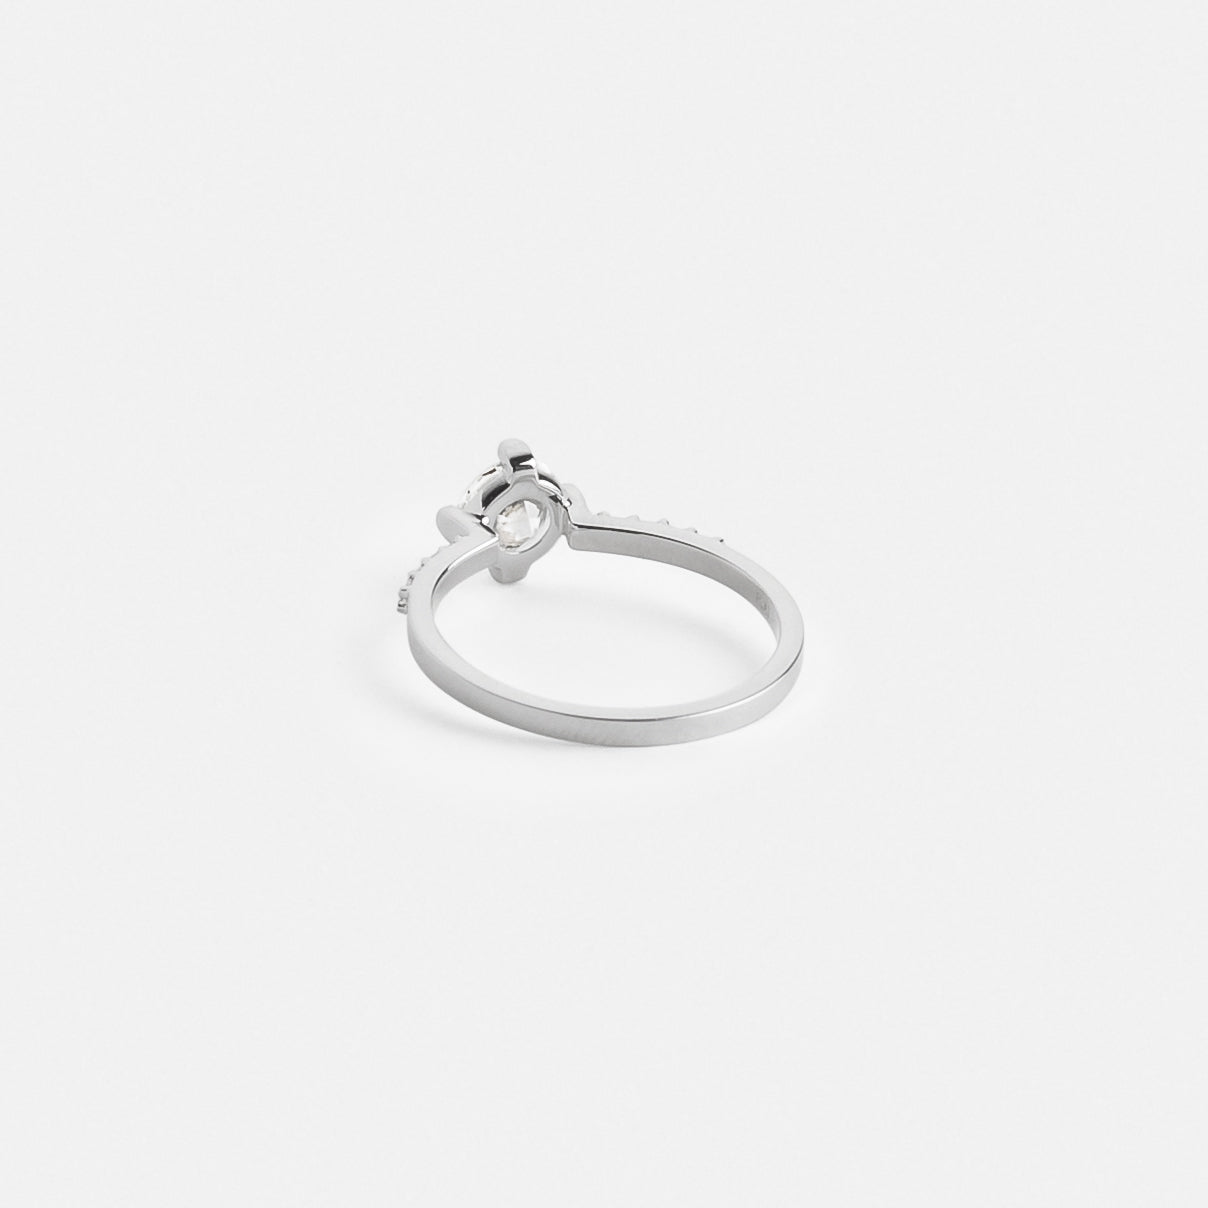 Imi Minimal Engagement Ring Platinum Set With 1ct round brilliant cut natural diamond By SHW Fine Jewelry NYC